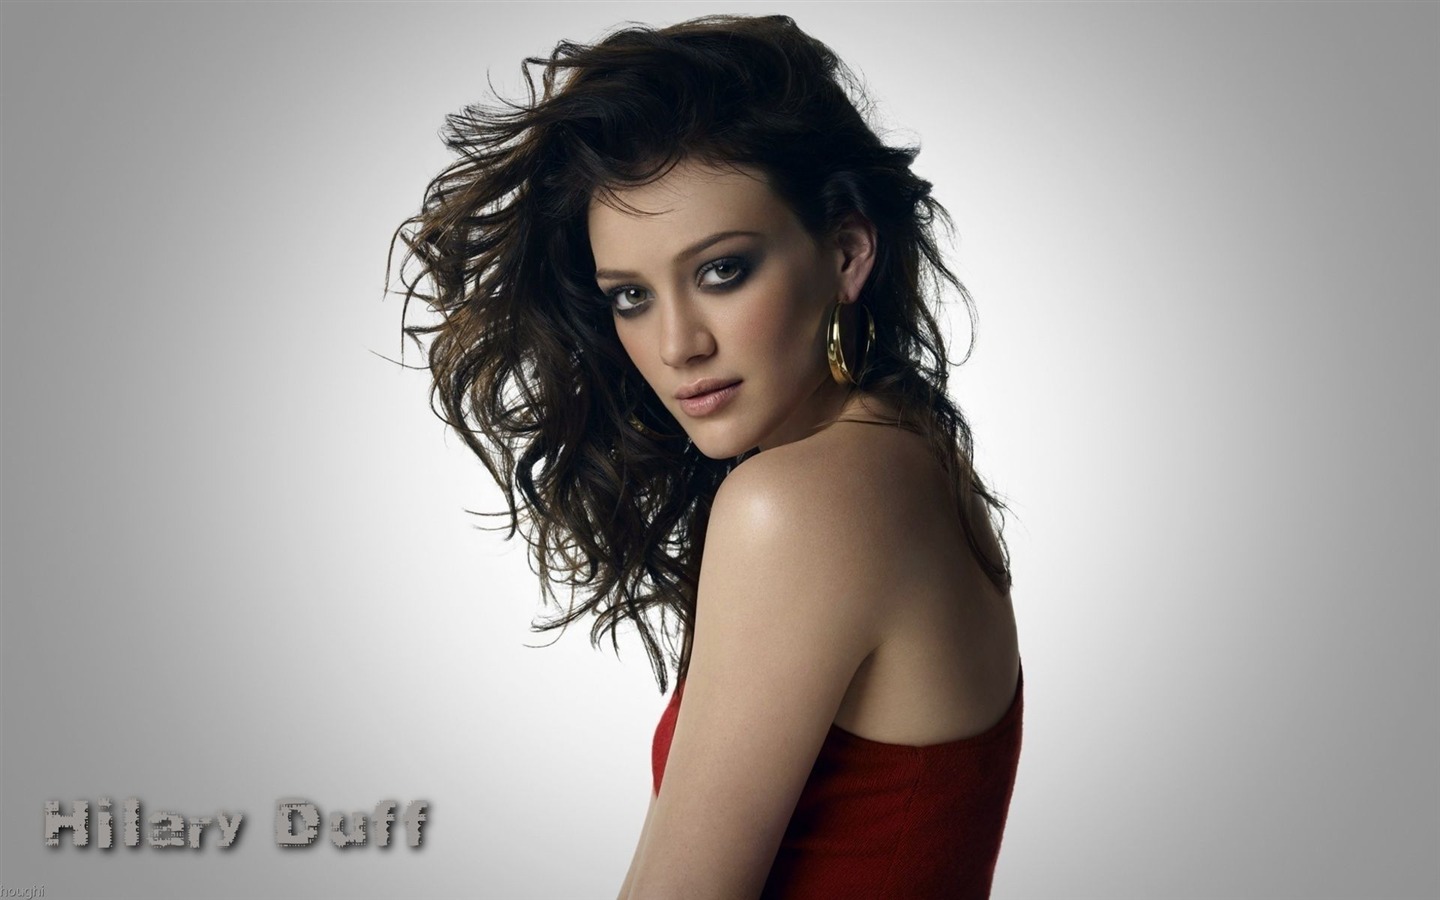 Hilary Duff #037 - 1440x900 Wallpapers Pictures Photos Images